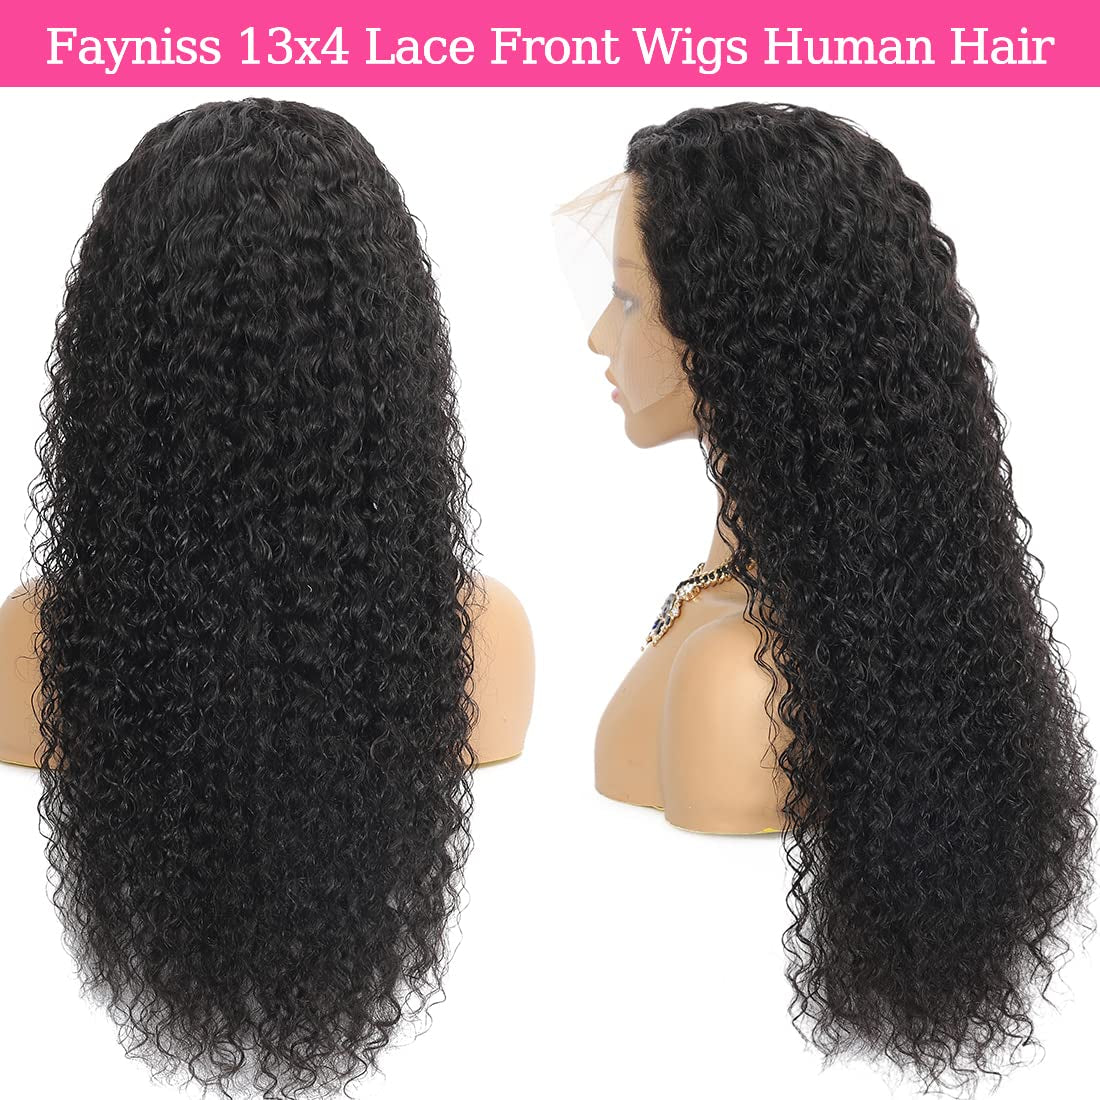 Wig Hair Curtain Spring Matte Wig Black Body Wavy Lace Wig Glue Free Lace  Front Human Hair for Party Gathering